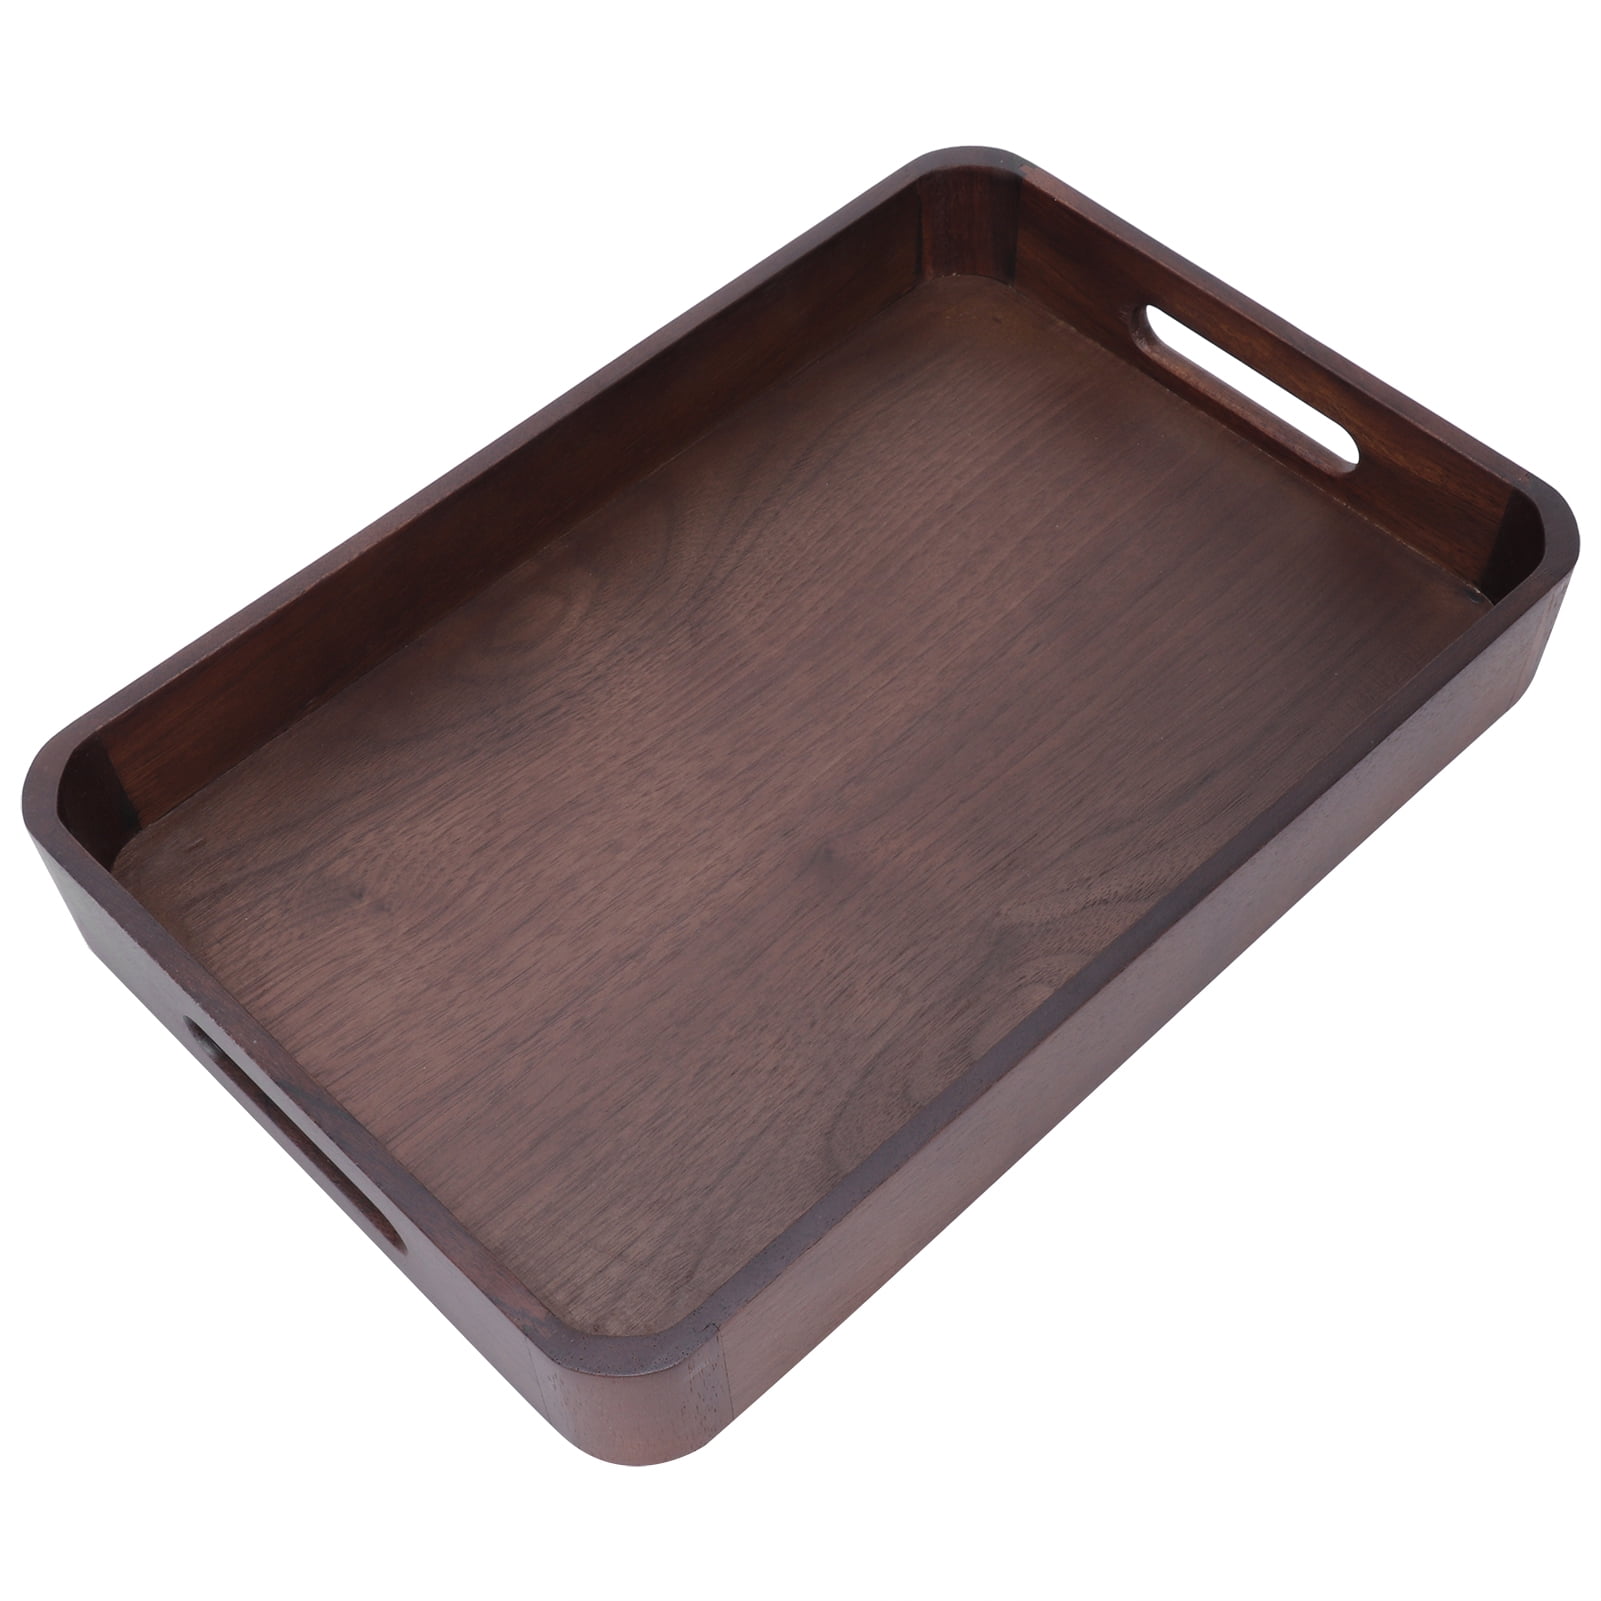 Breakfast Kitchen Platter for Decoupage Wooden Serving Tray in three sizes 